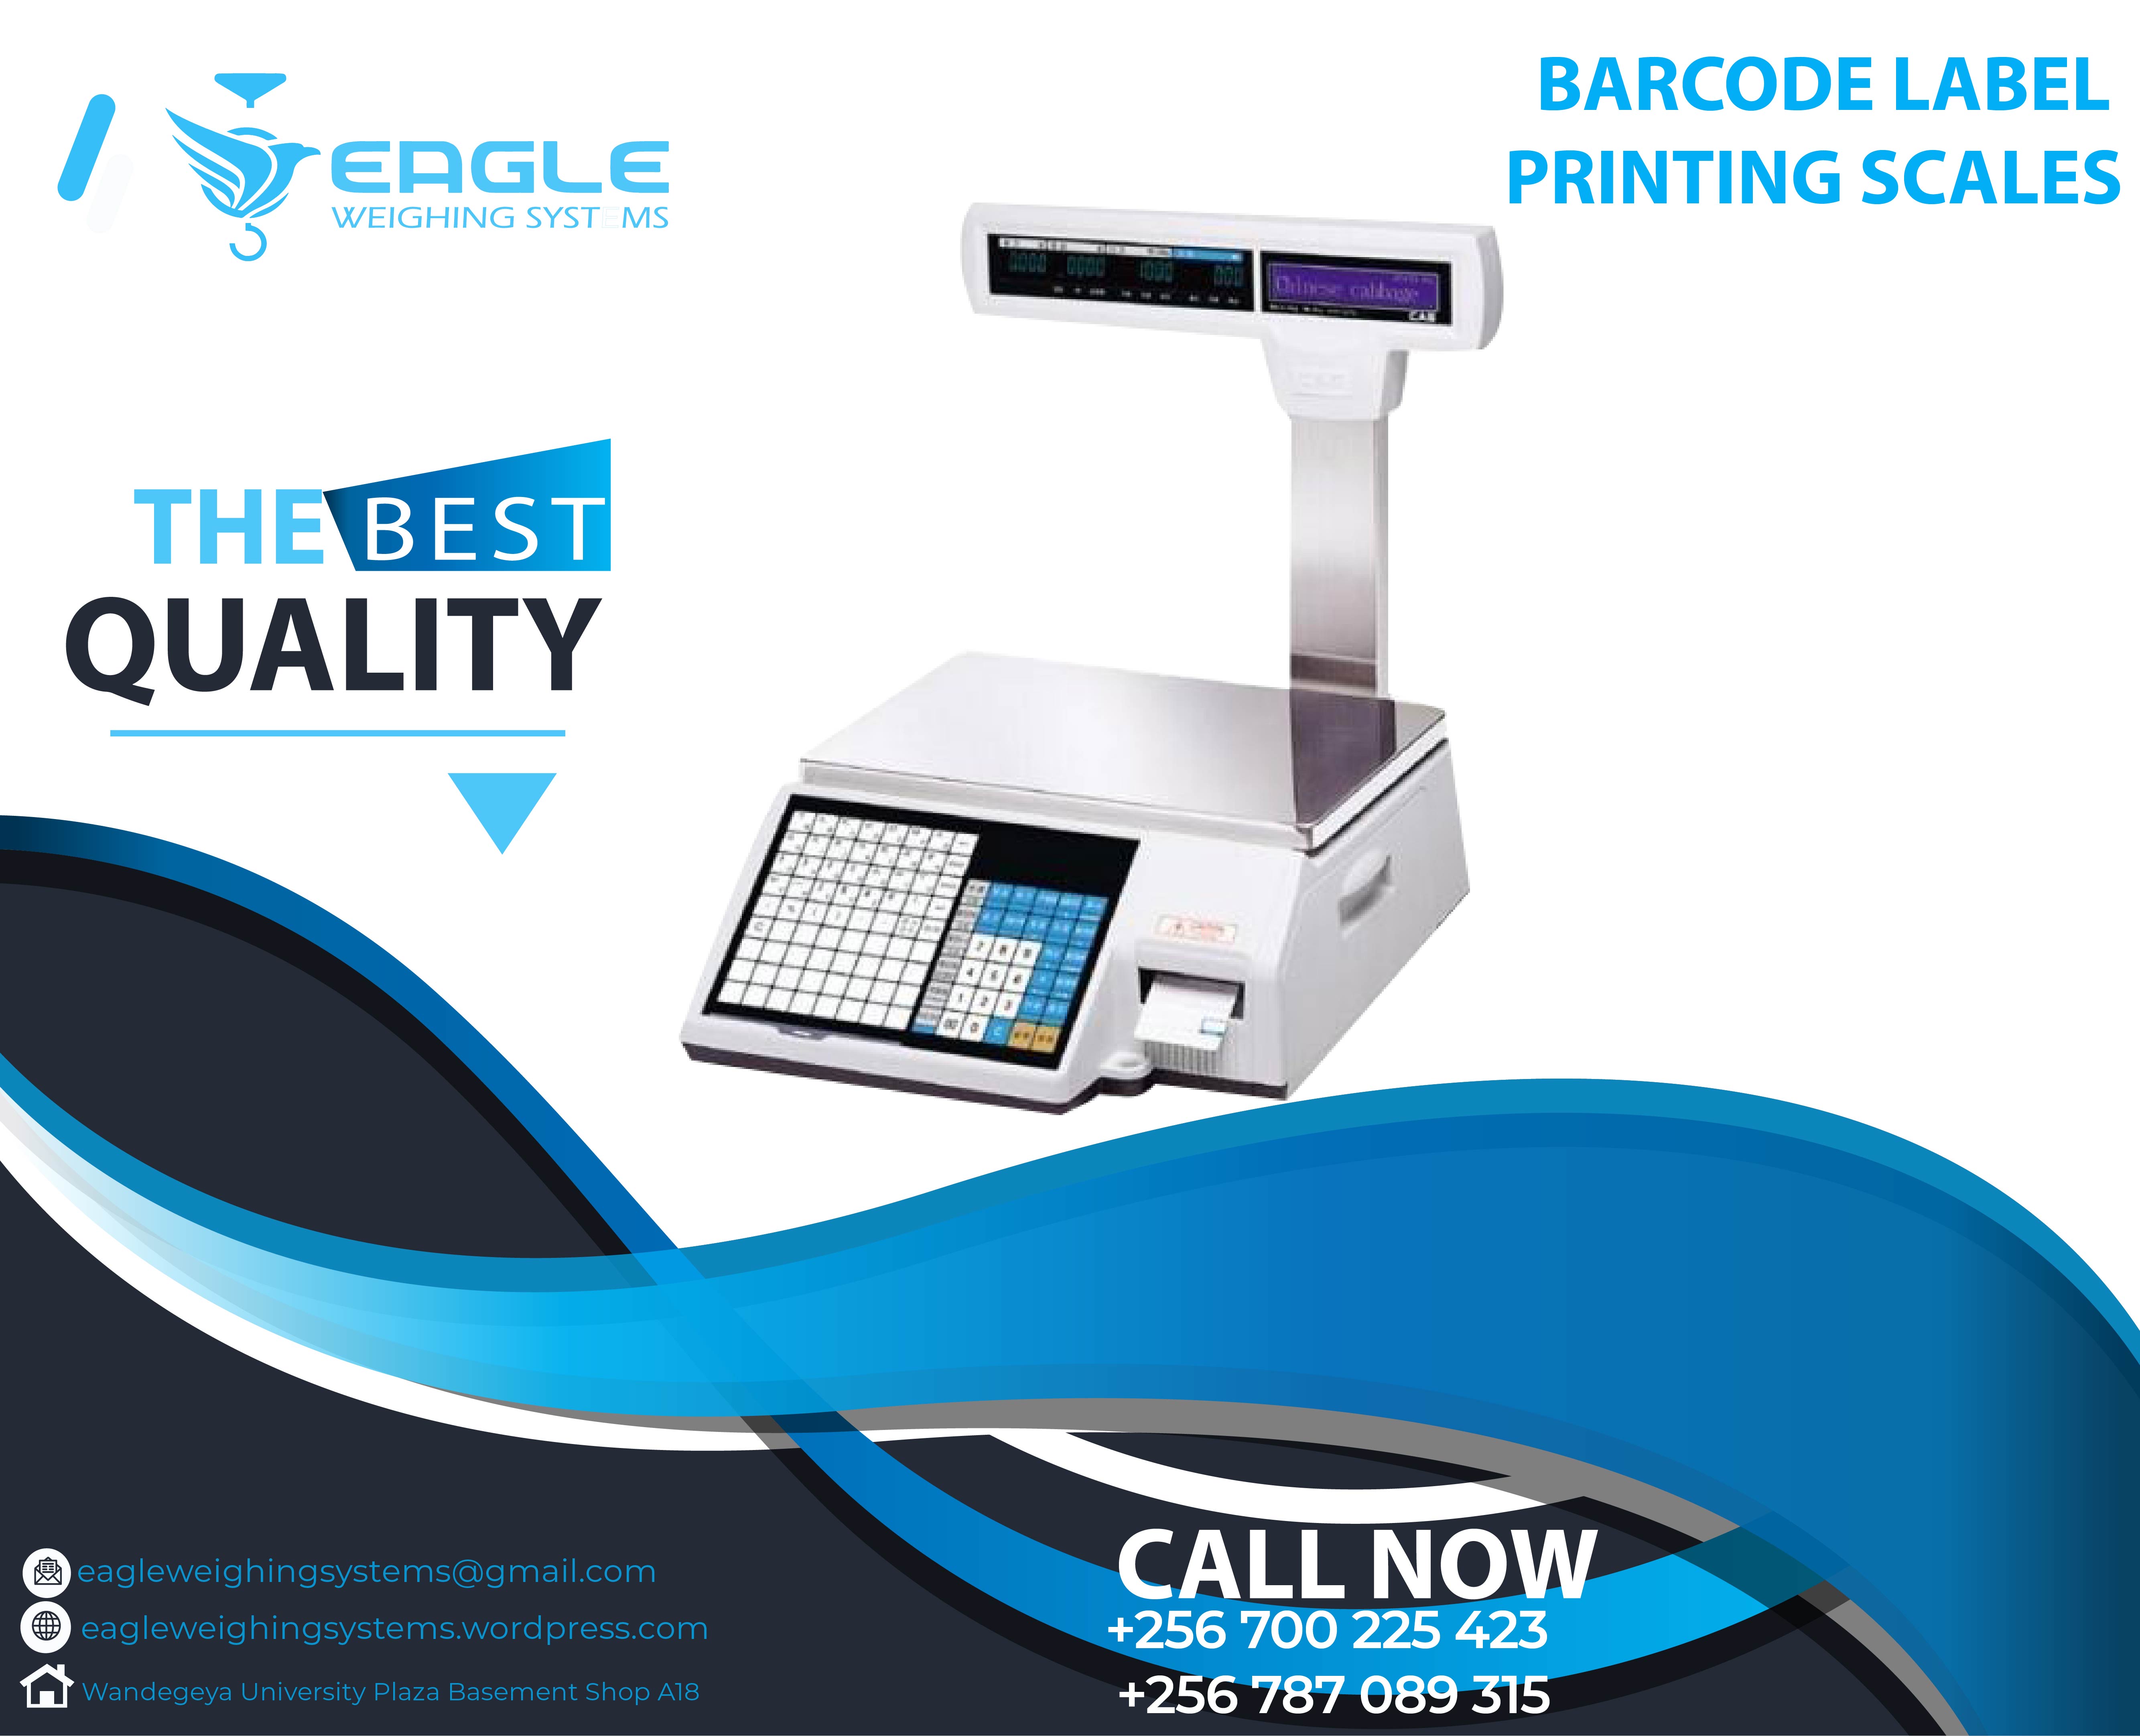 +256 (0) 787089315 Electronic Scale Printing Label Display Scale, Kampala Central Division, Central, Uganda